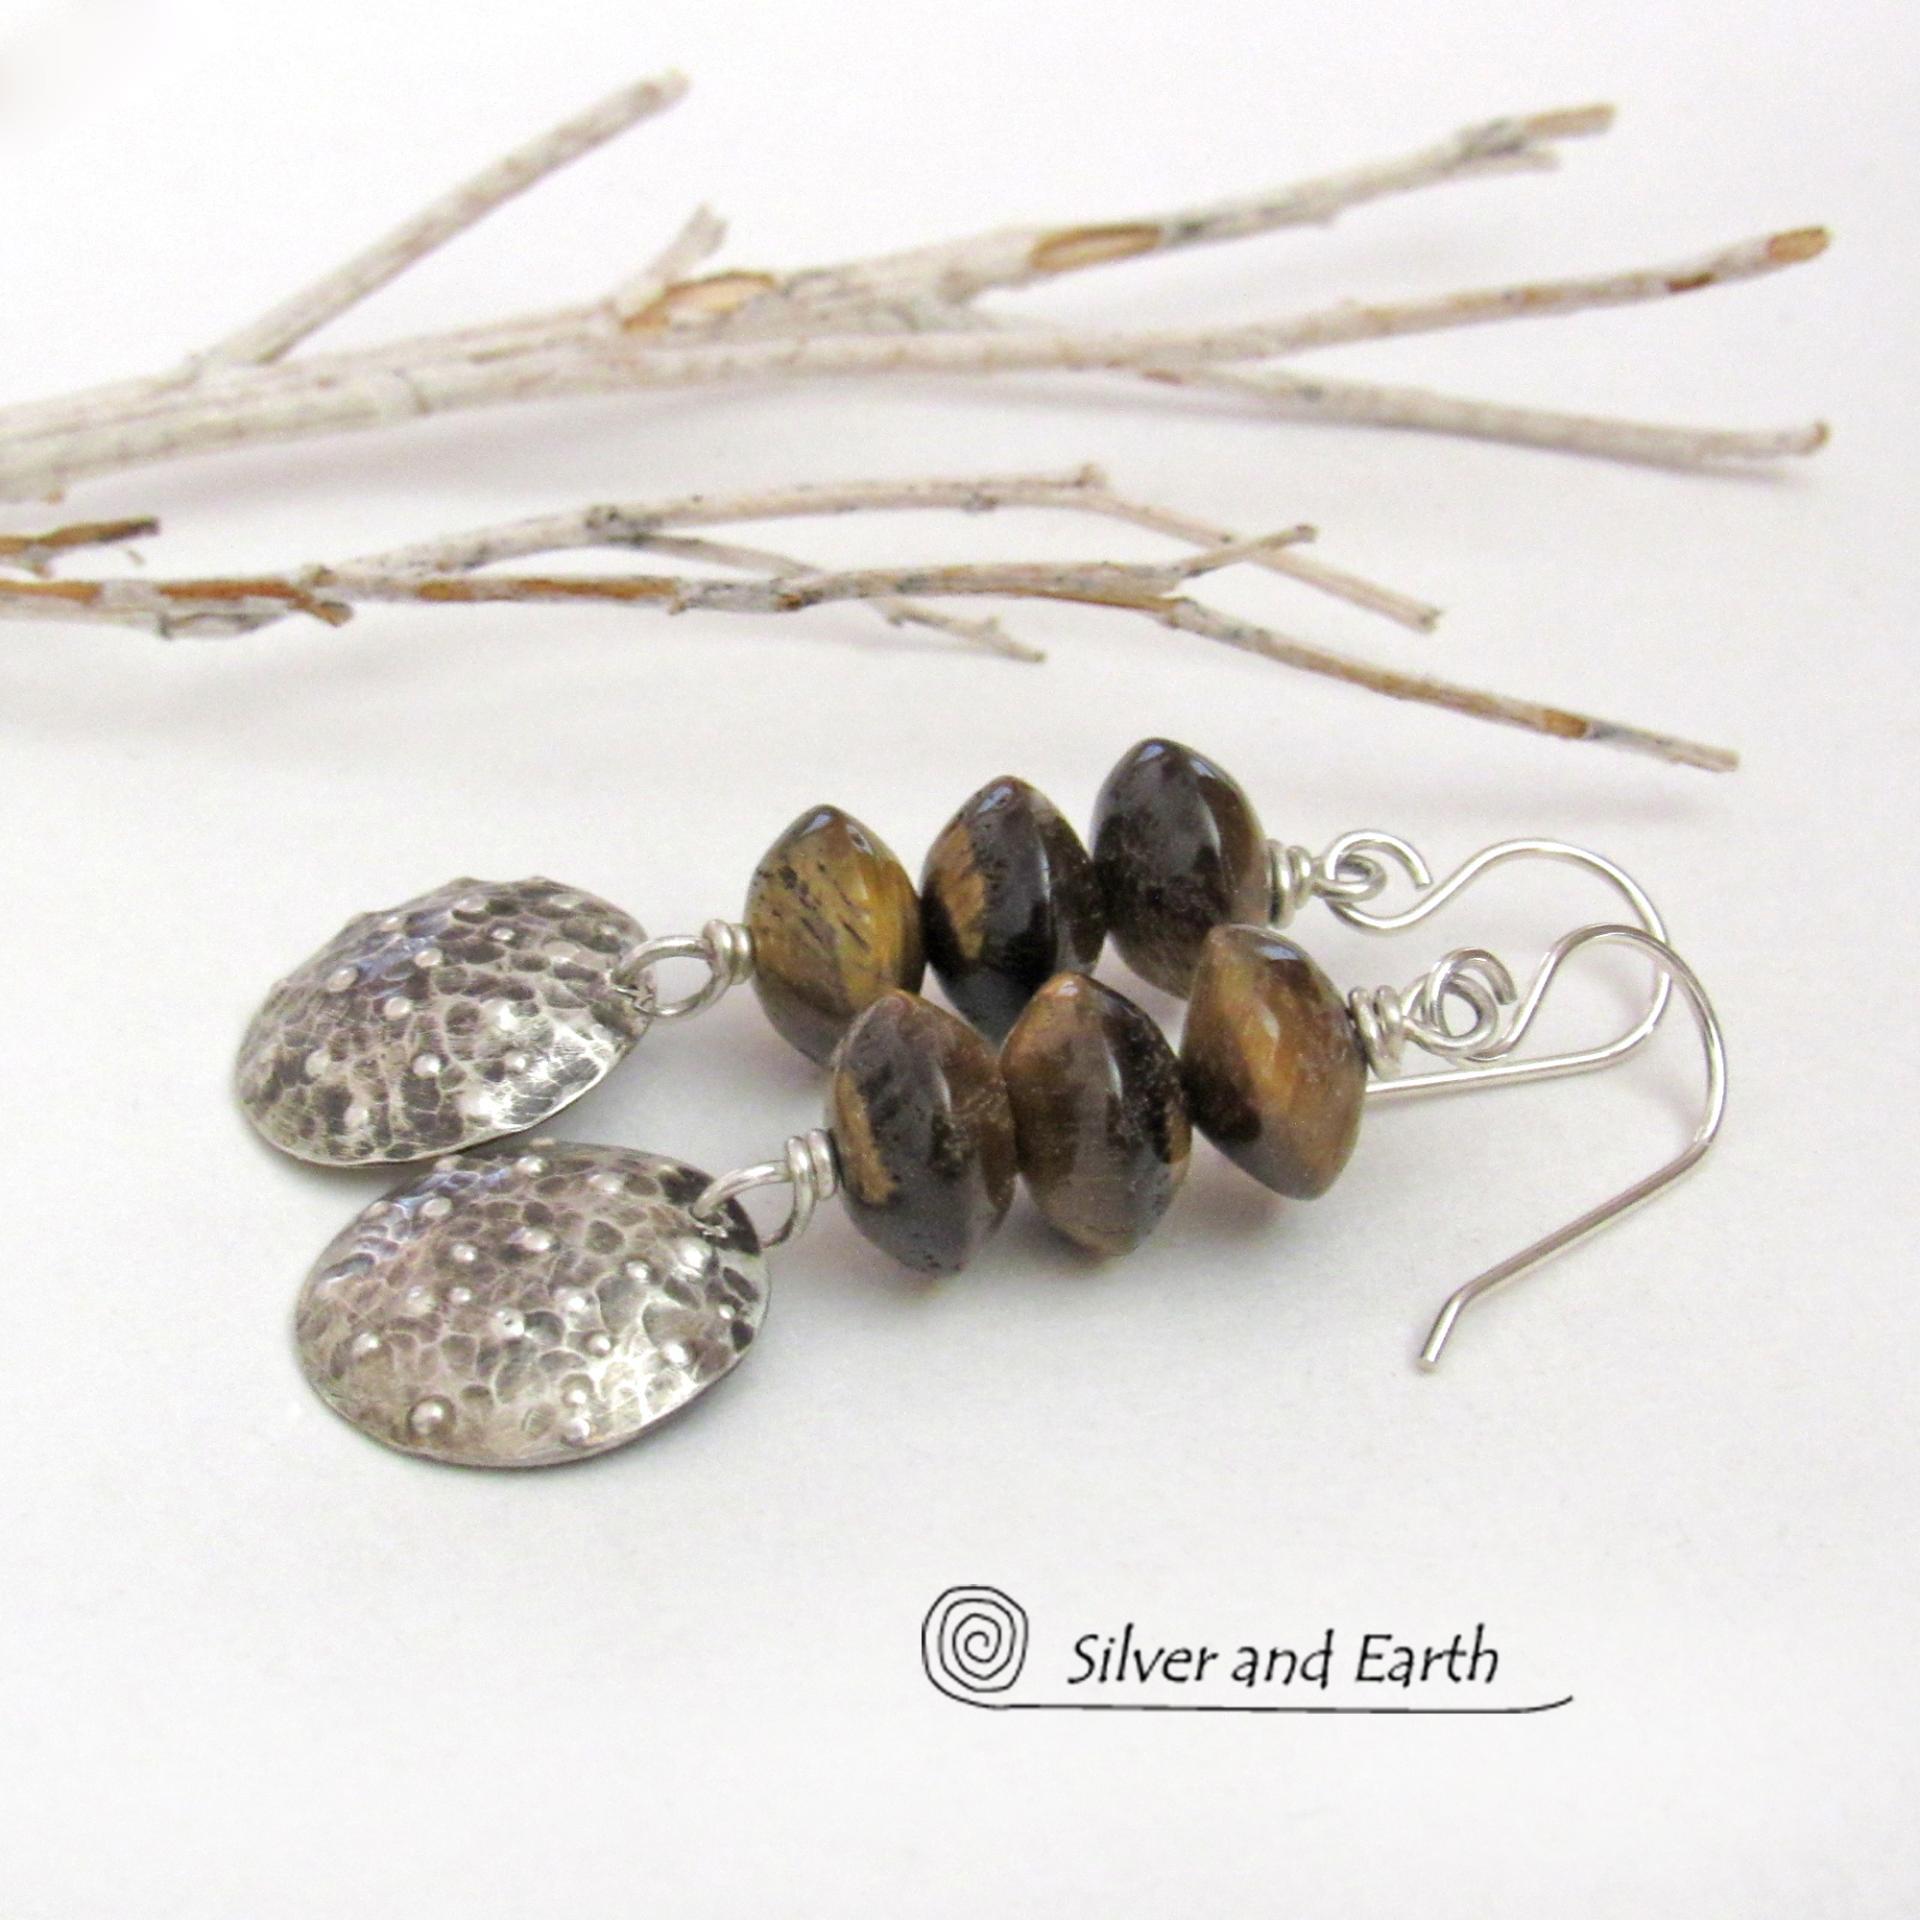 Small Sterling Silver Dangle Earrings with Brown Tiger's Eye Stones